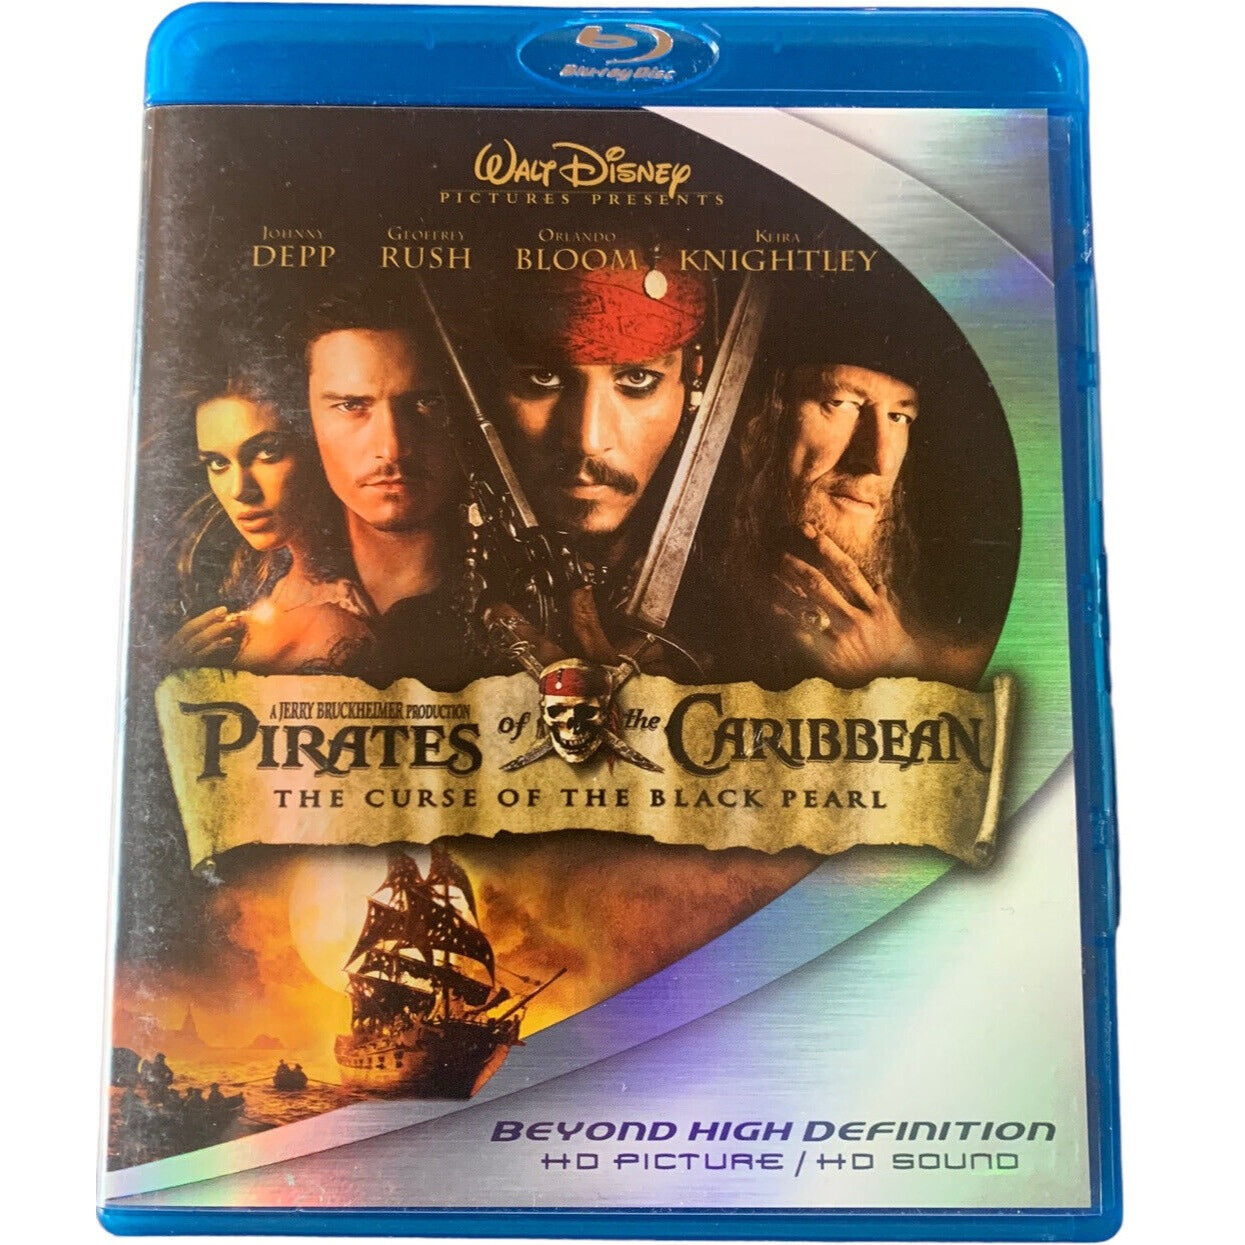 Pirates of the Caribbean: The Curse of the Black Pearl (Blu-Ray, 2003)